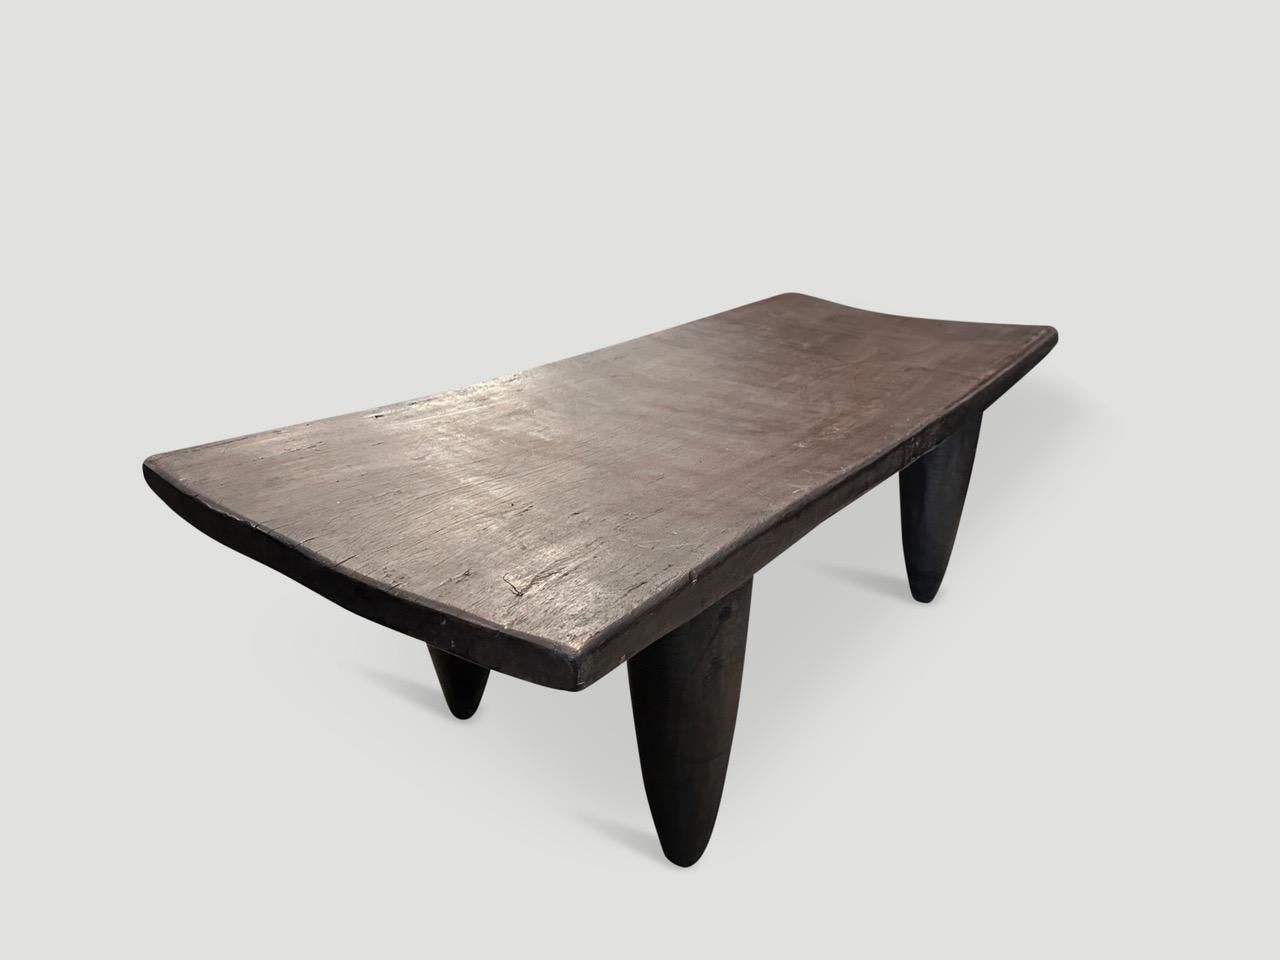 Antique coffee table hand carved by the Senufo tribes from a single block of Iroko wood, native to the west coast of Africa. The wood is tough, dense and very durable. Shown with cone style legs. We only source the best. 

This beautiful coffee